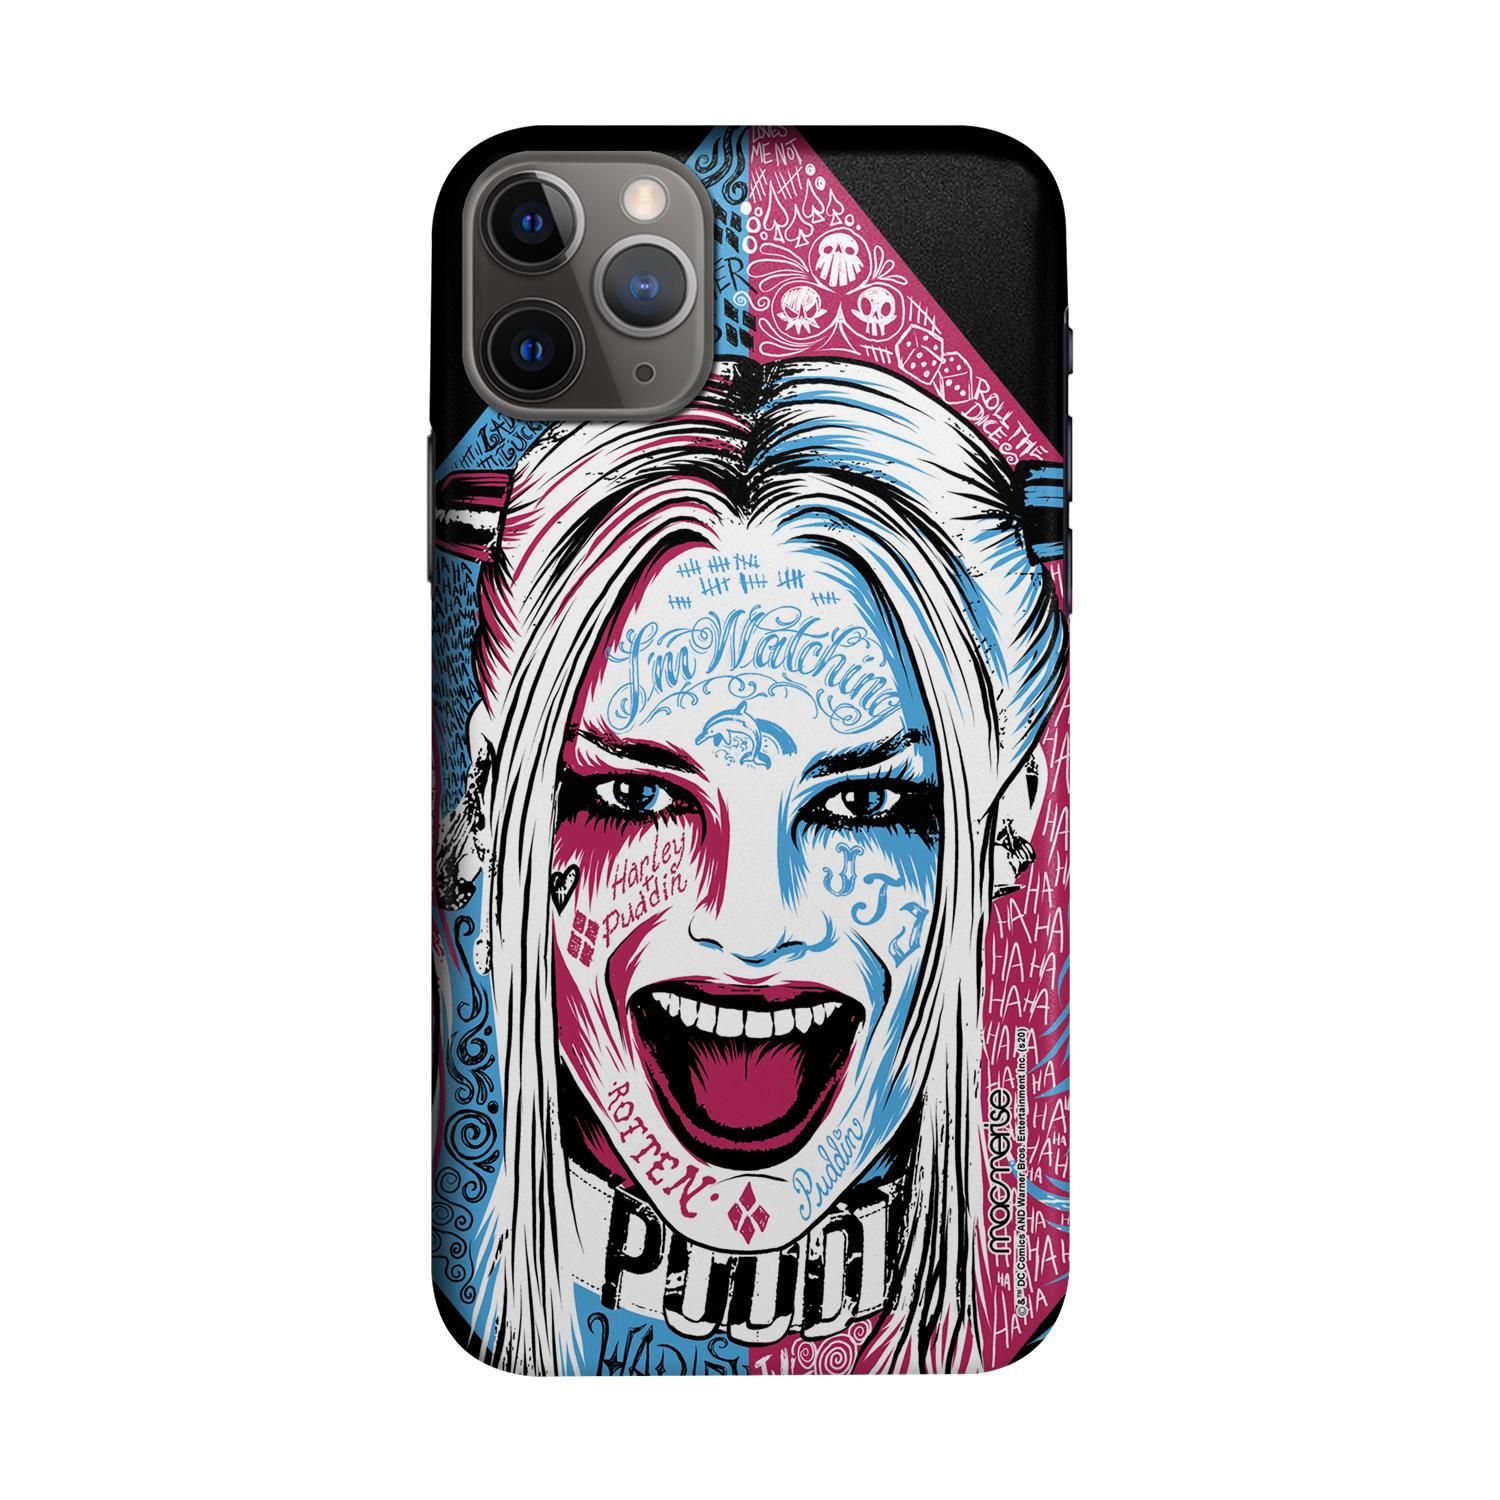 Buy Wicked Harley Quinn - Sleek Phone Case for iPhone 11 Pro Max Online